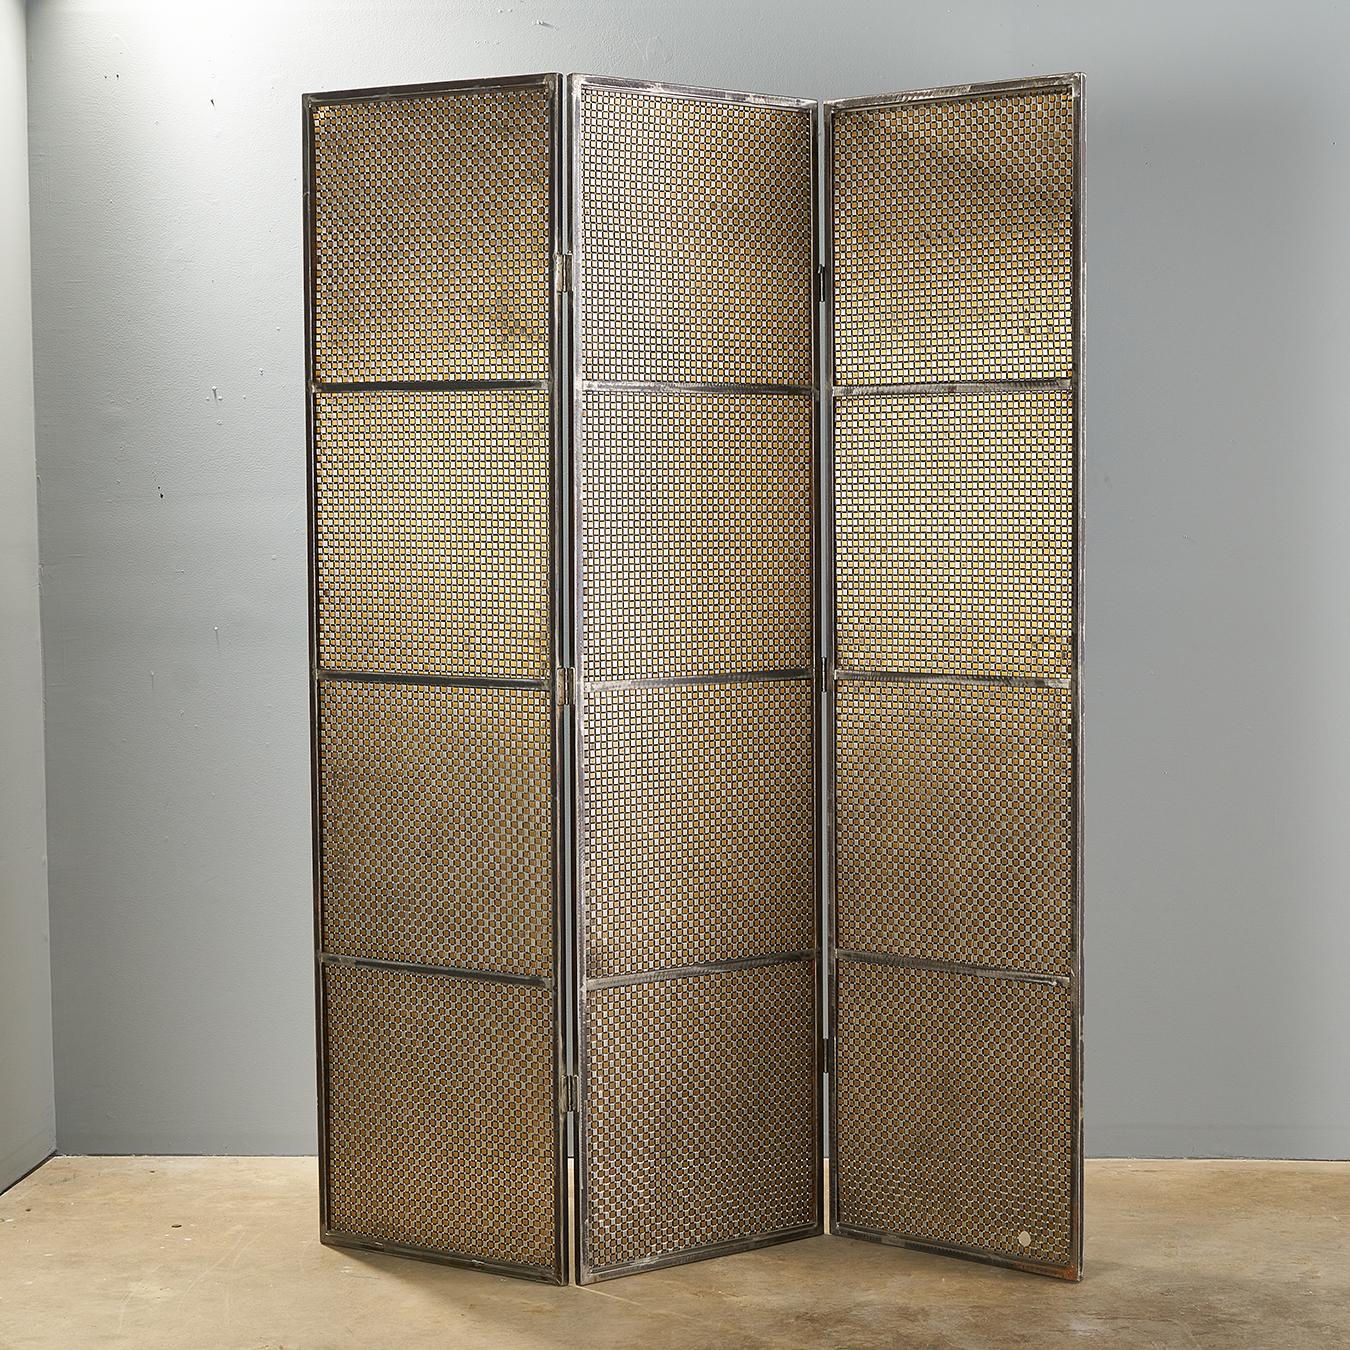 Expertly hand crafted folding screen by noted Virginia artist & Sculptor Maurice Beane. Very heavy gauge woven steel. This screen adds so much texture and dimension to a space, and can easily go in a very glam moody direction, to industrial, to a